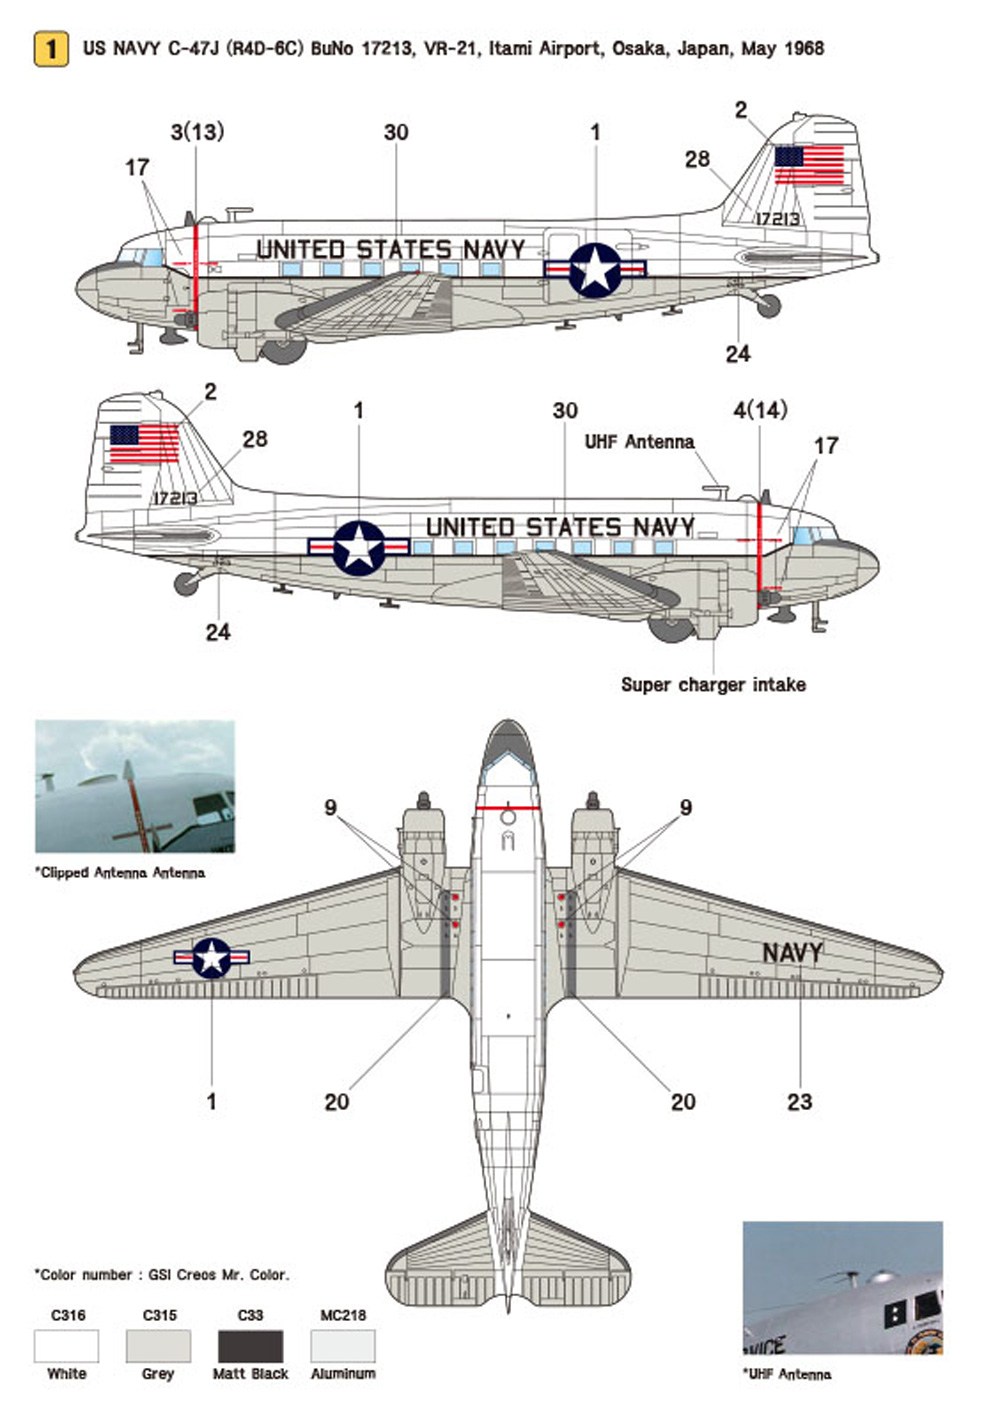 WD72006 Wolfpack 1/72 decal C-47 Skytrain Pt 1 USN and JMSDF R4D-6 Fleets 